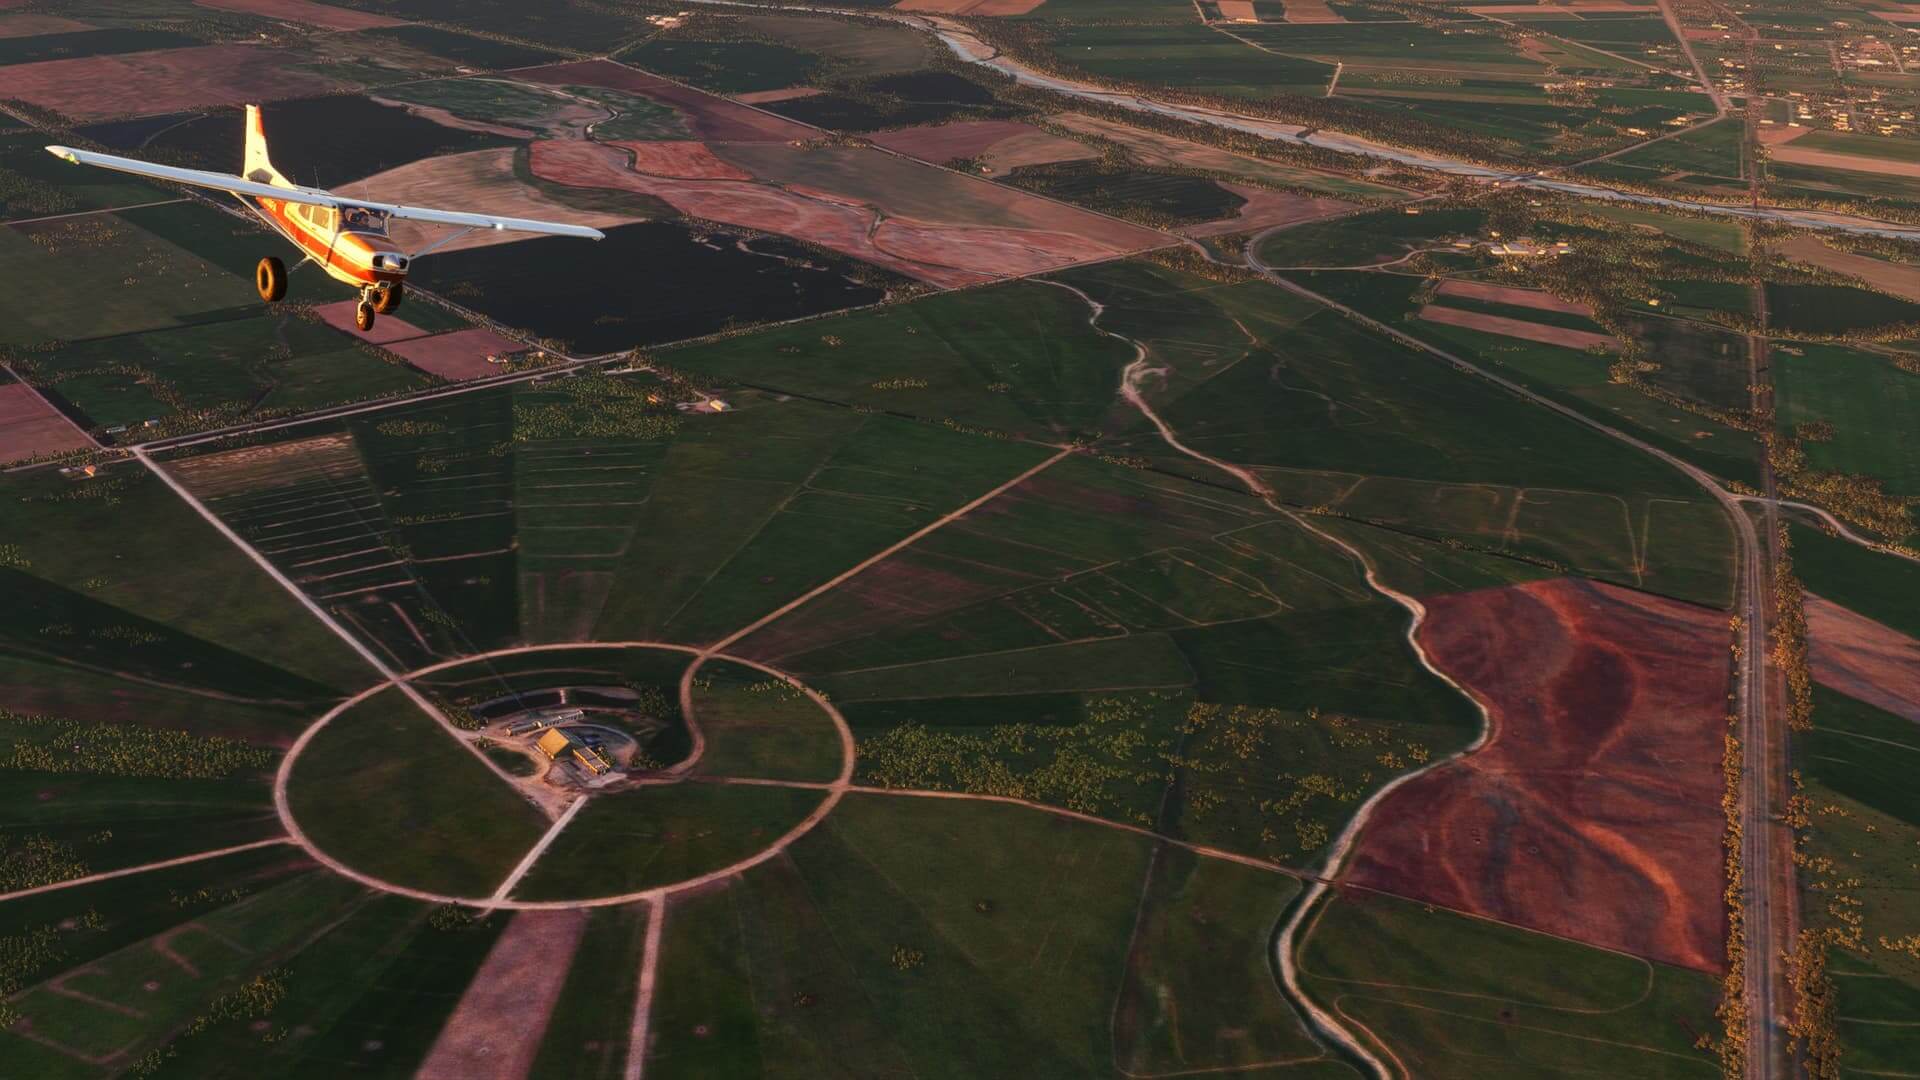 A high-wing Cessna banks to the left as it flies over farmland, with weaving dirt tracks cutting through the fields